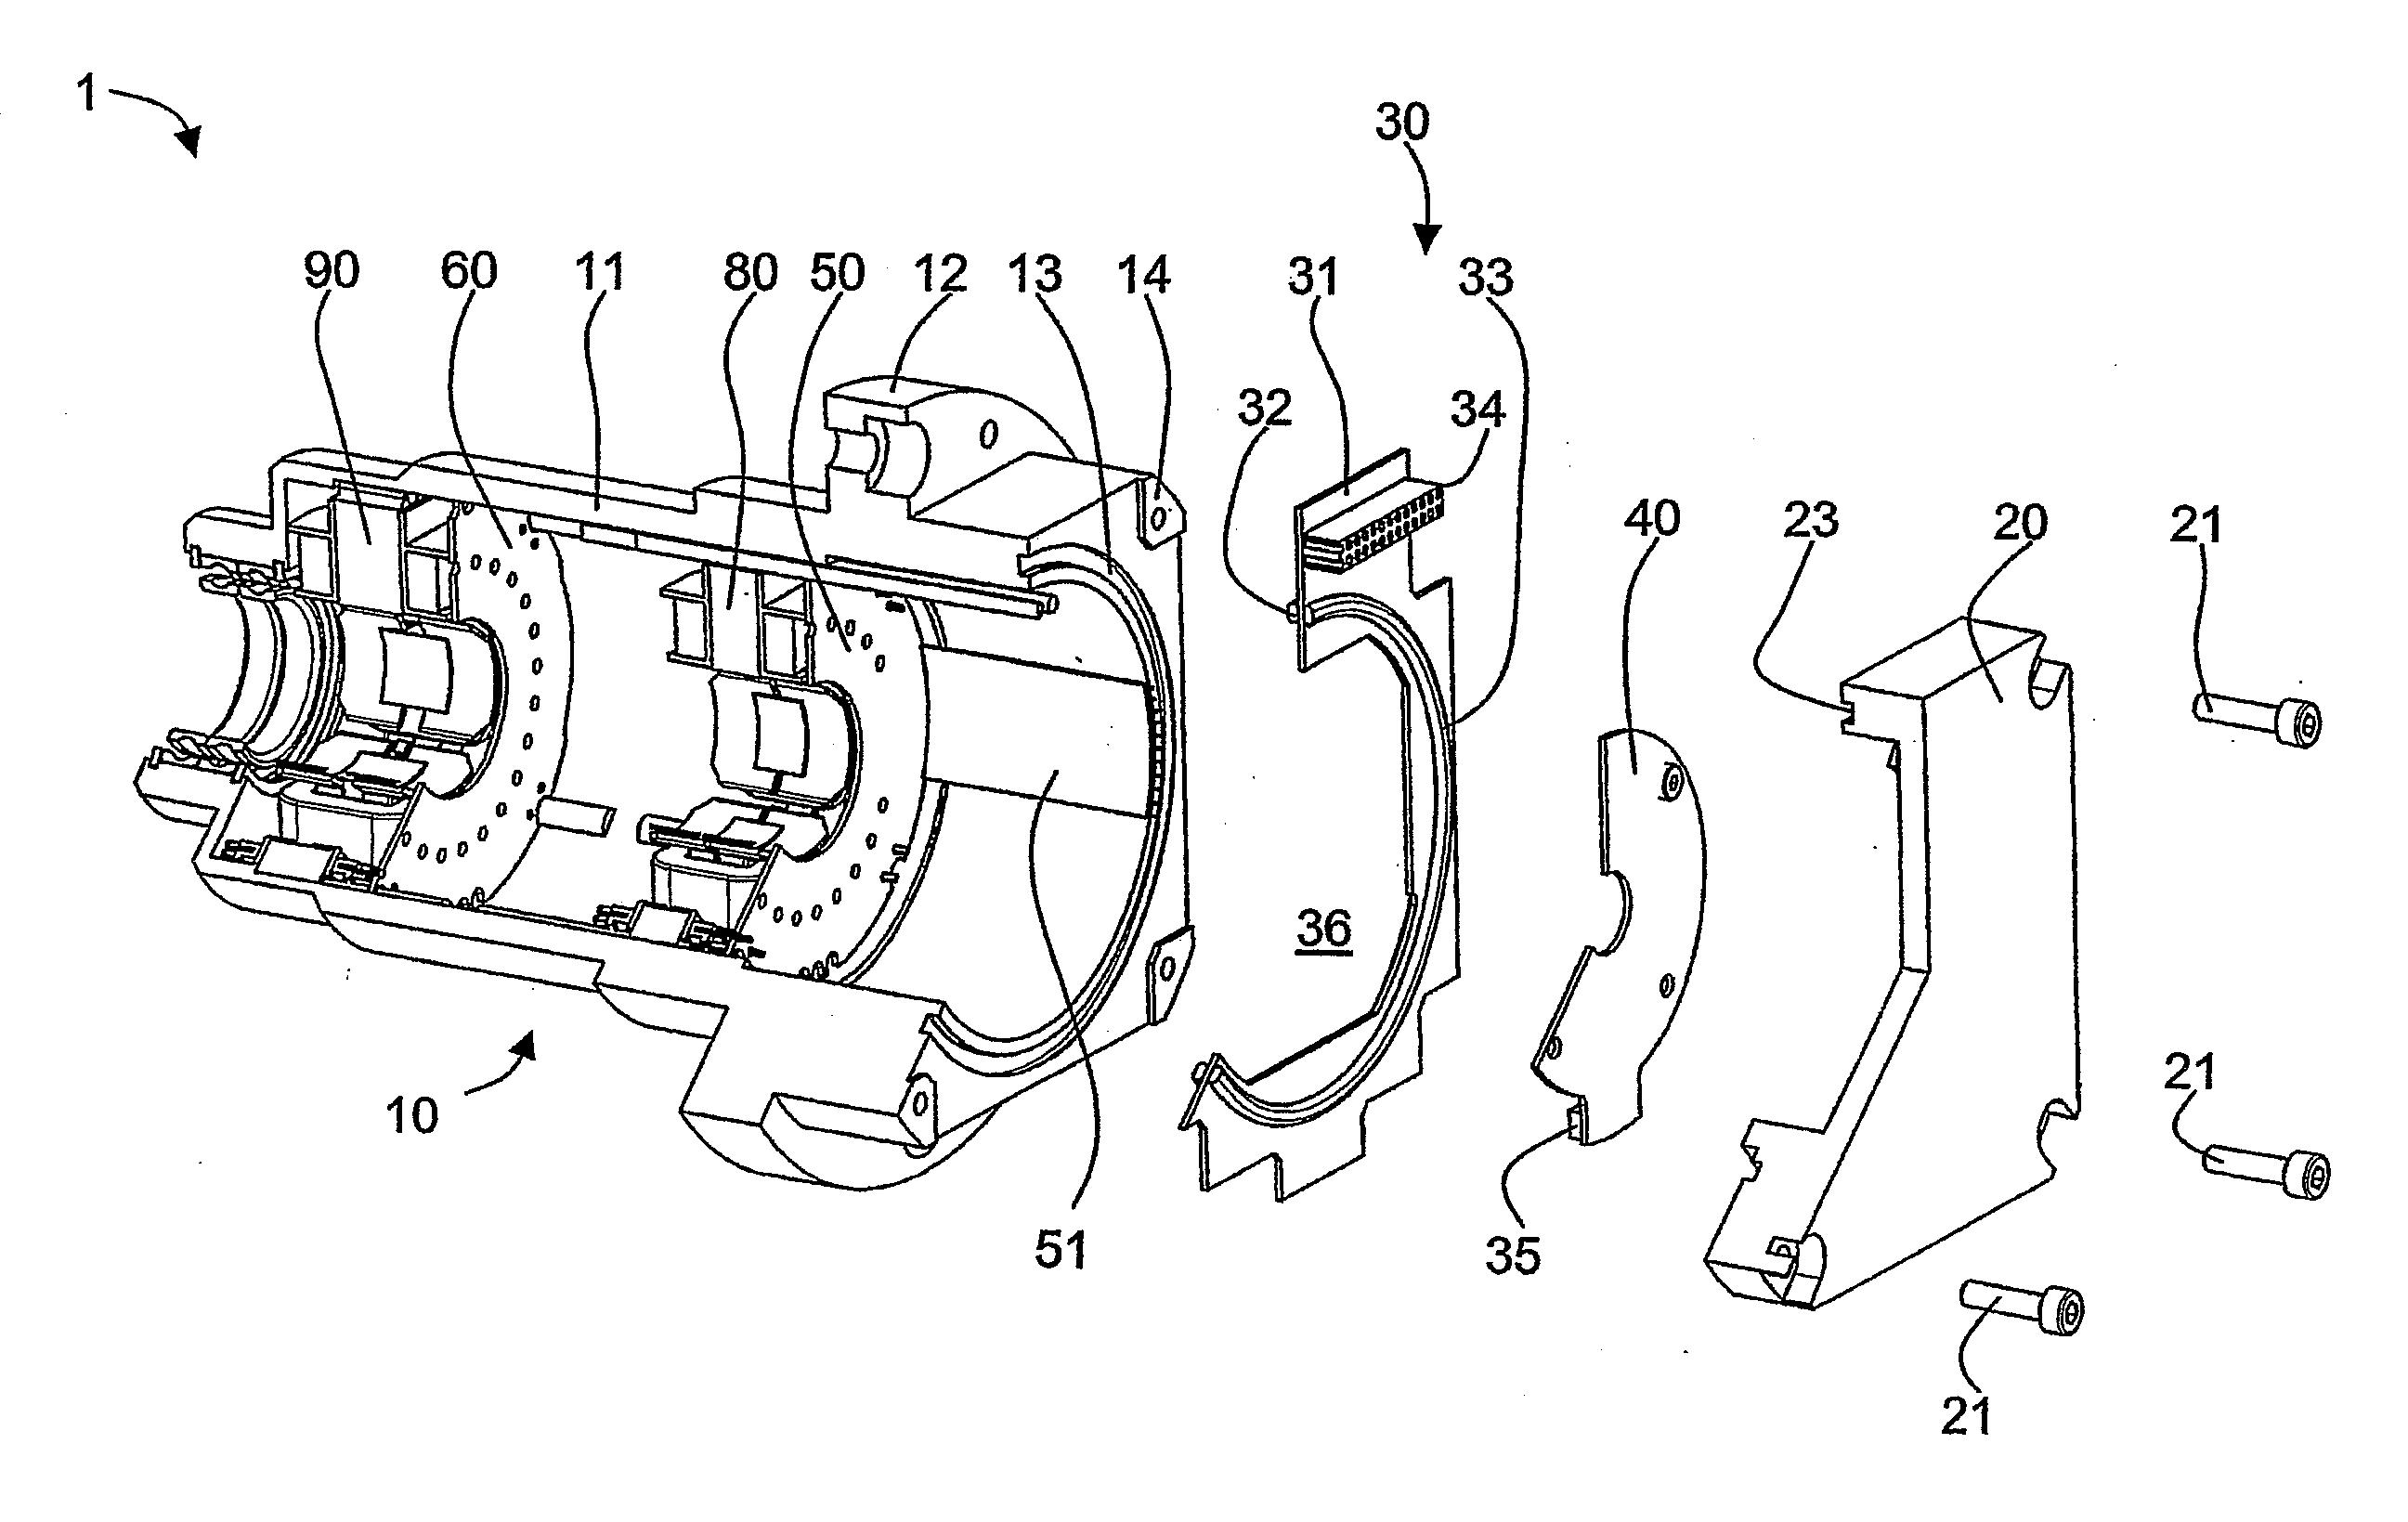 Magnetic Bearing Device With an Improved Vacuum Feedthrough